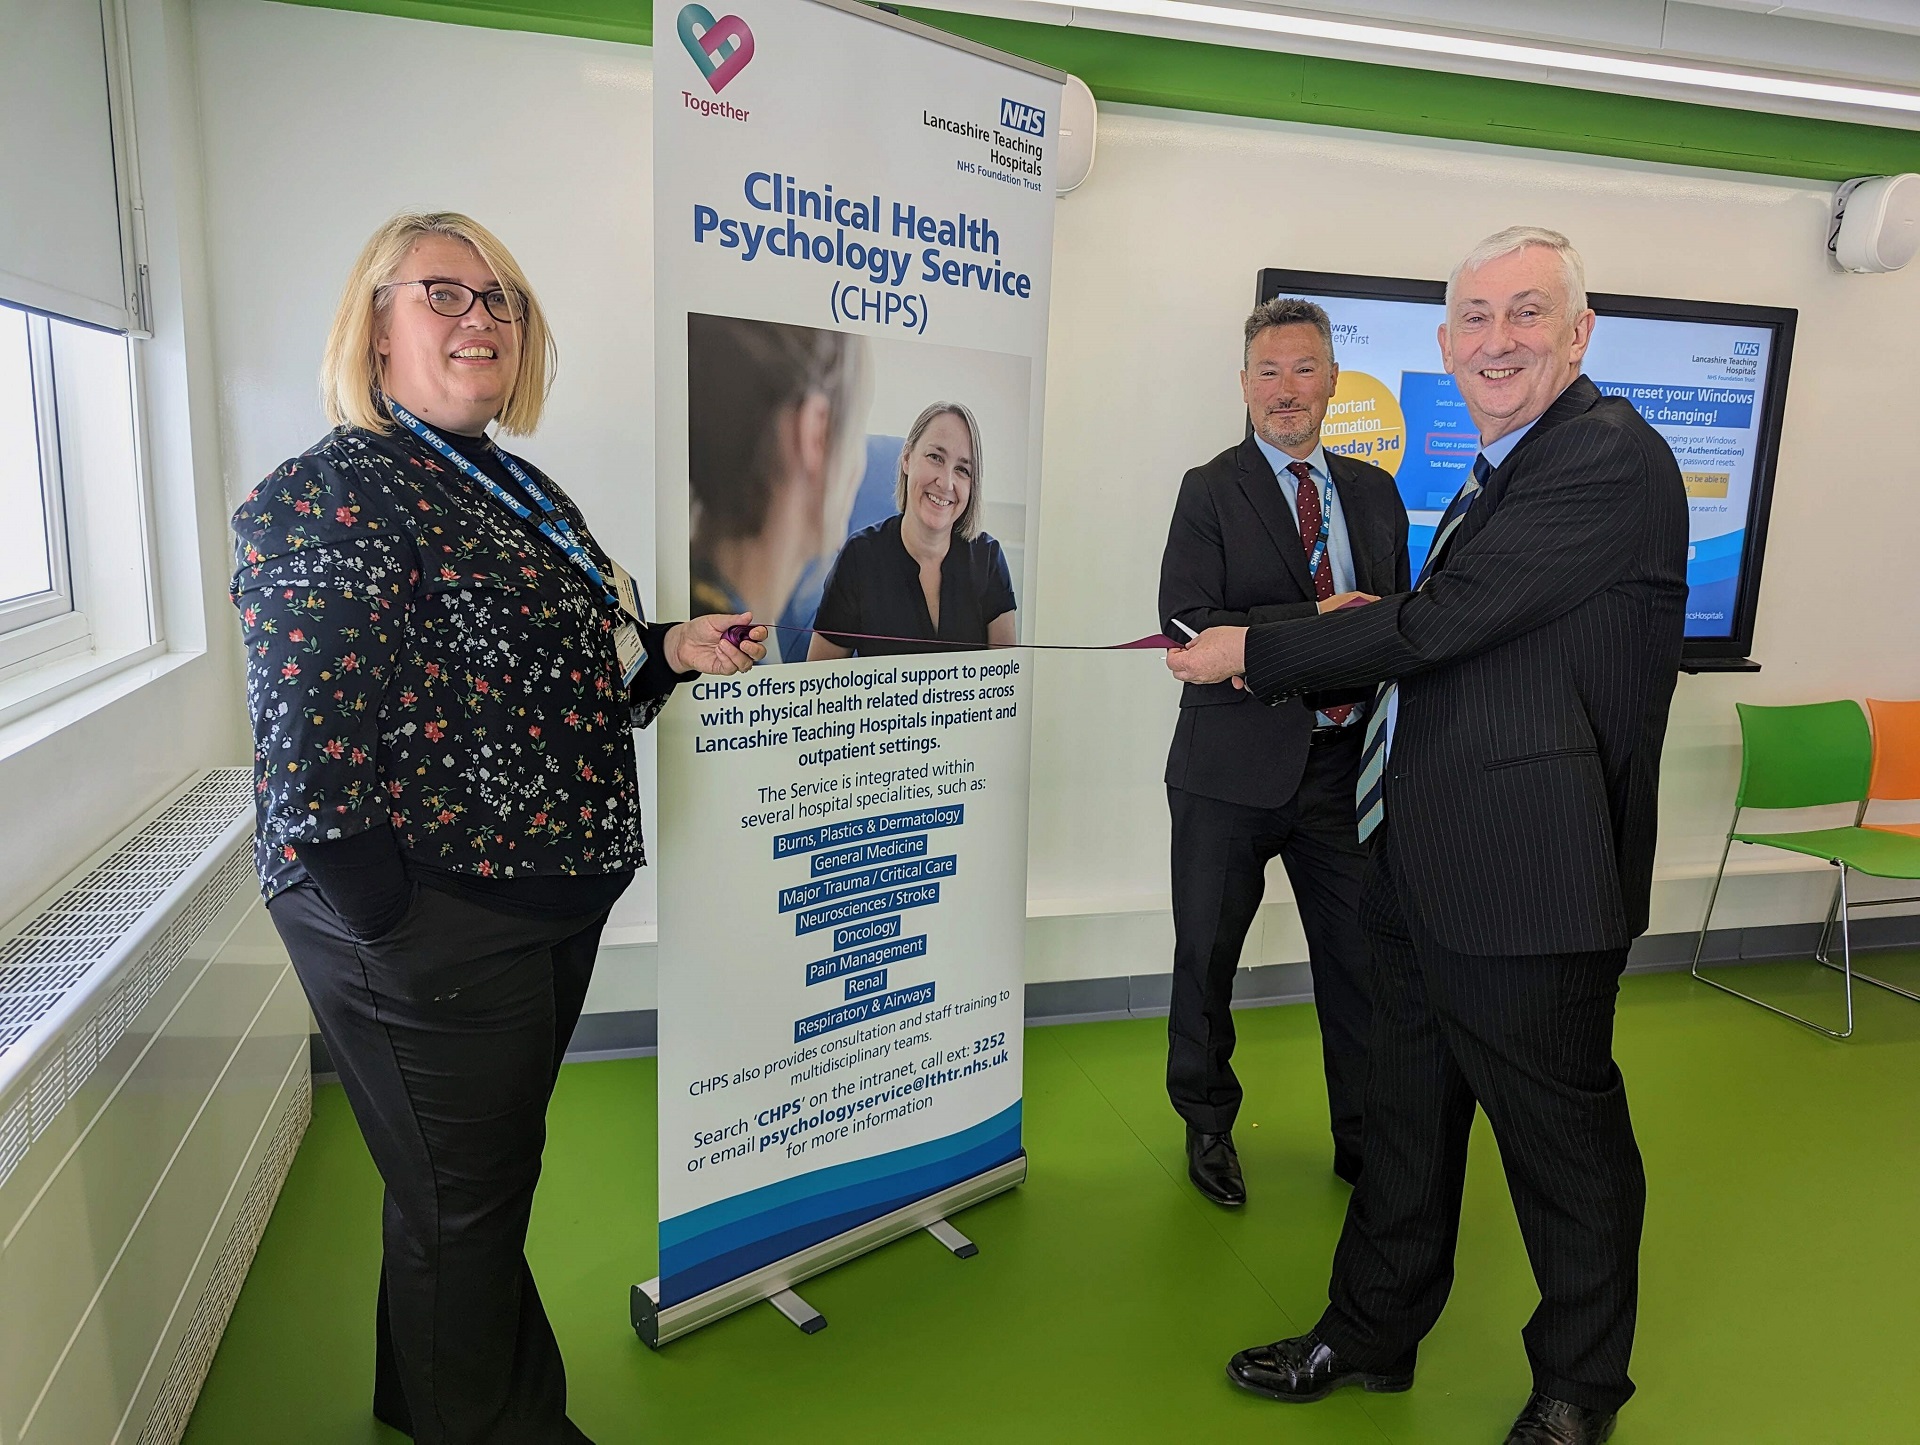 Sir Lindsay Hoyle cuts a ribbon in front of a Psychology Service vertical banner.